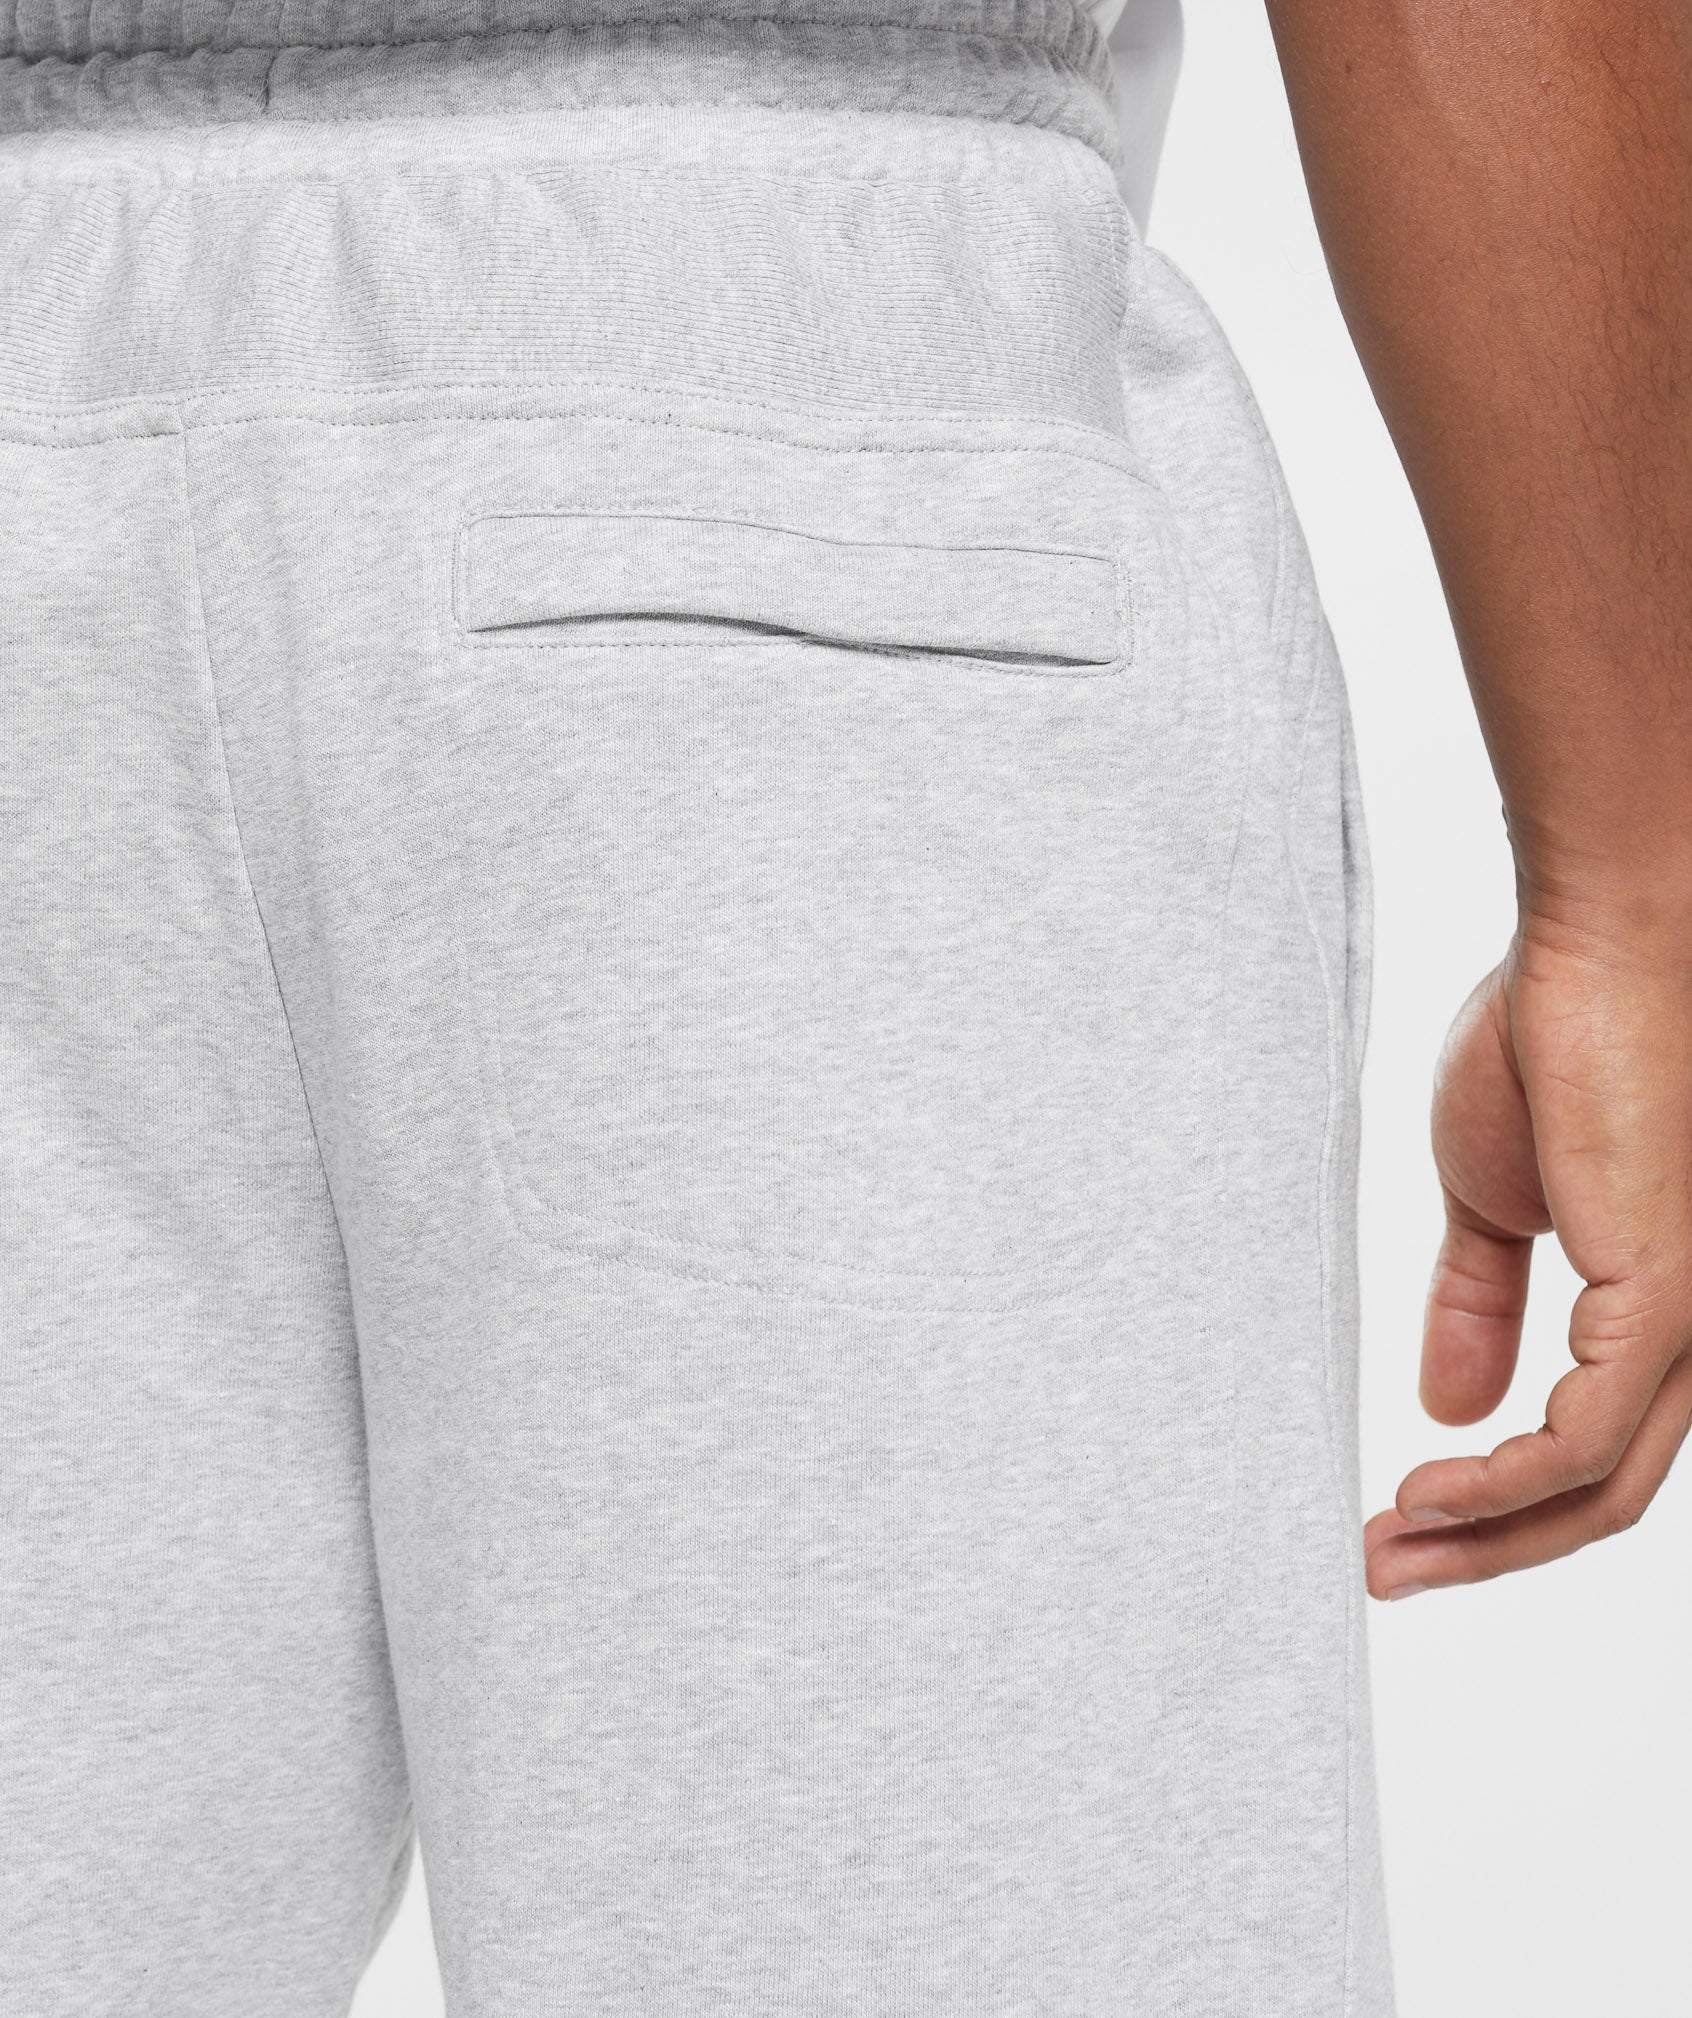 Rest Day Essentials Shorts in Light Grey Core Marl - view 5